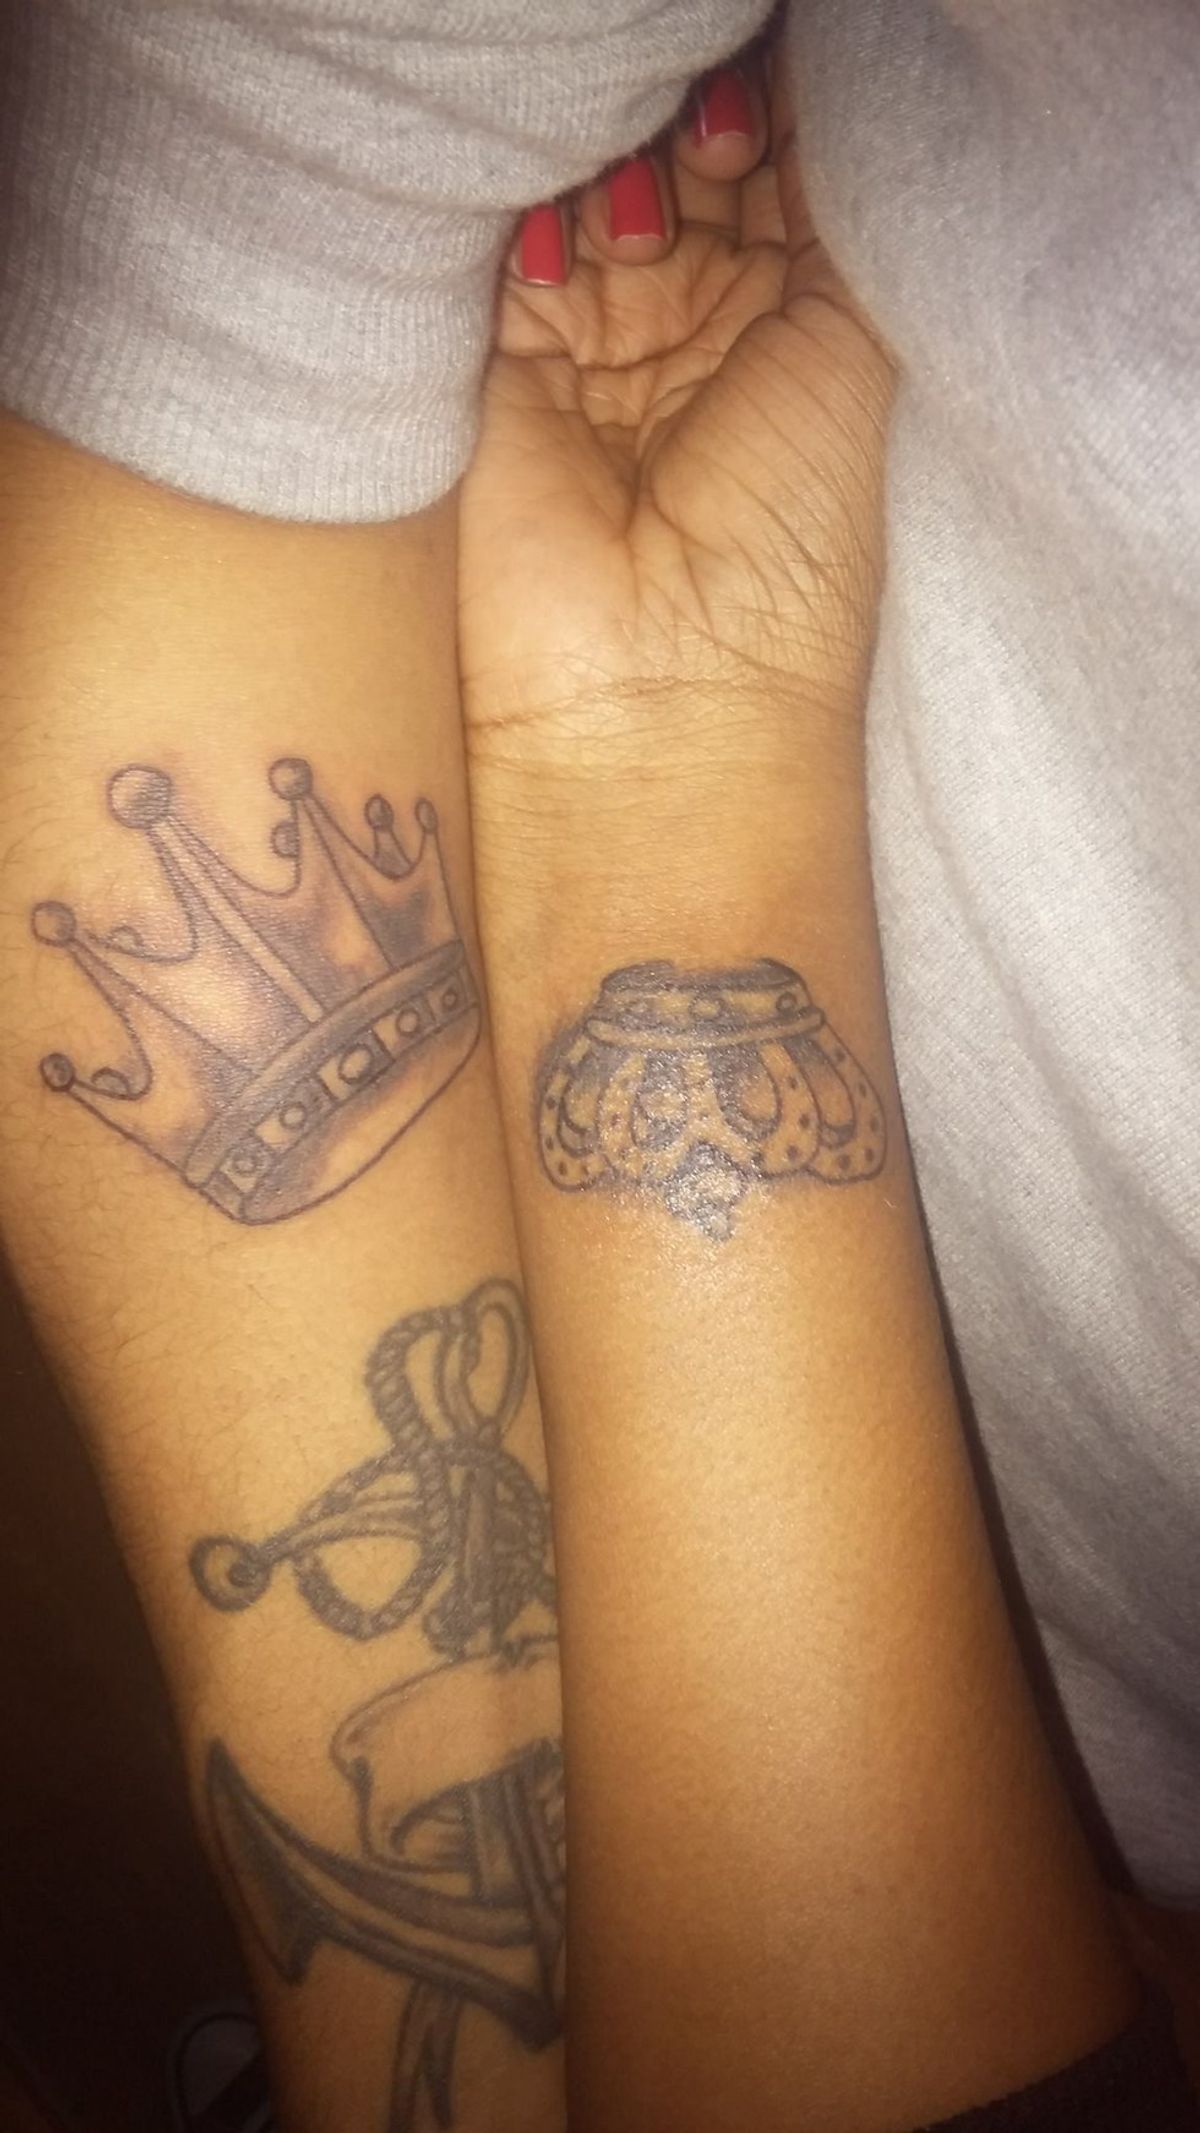 7 Reasons Why You Shouldn't Tattoo Your Boyfriend/Girlfriend's Name